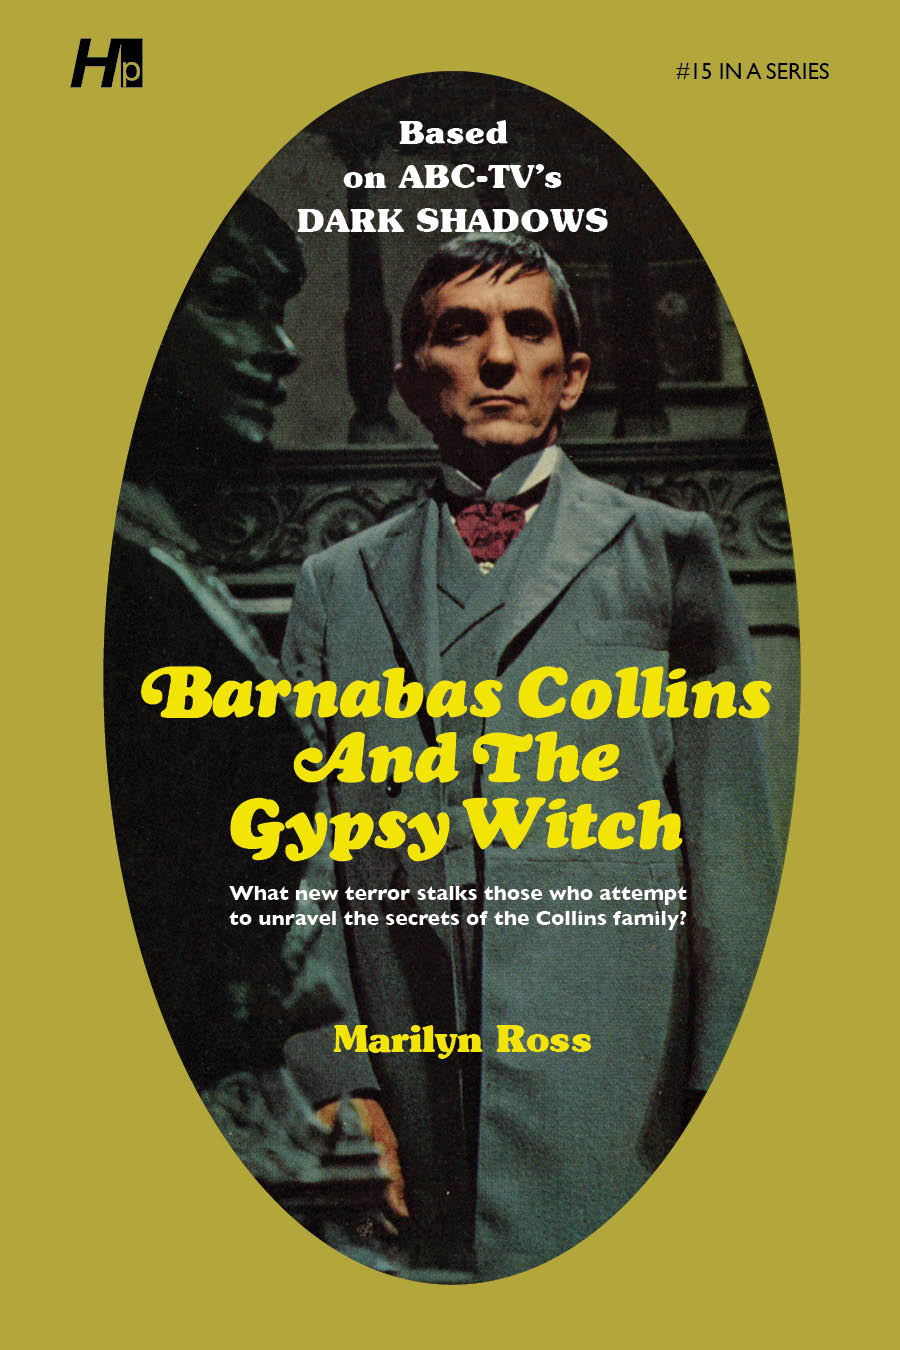 Dark Shadows #15: Barnabas Collins and the Gypsy Witch [Paperback]